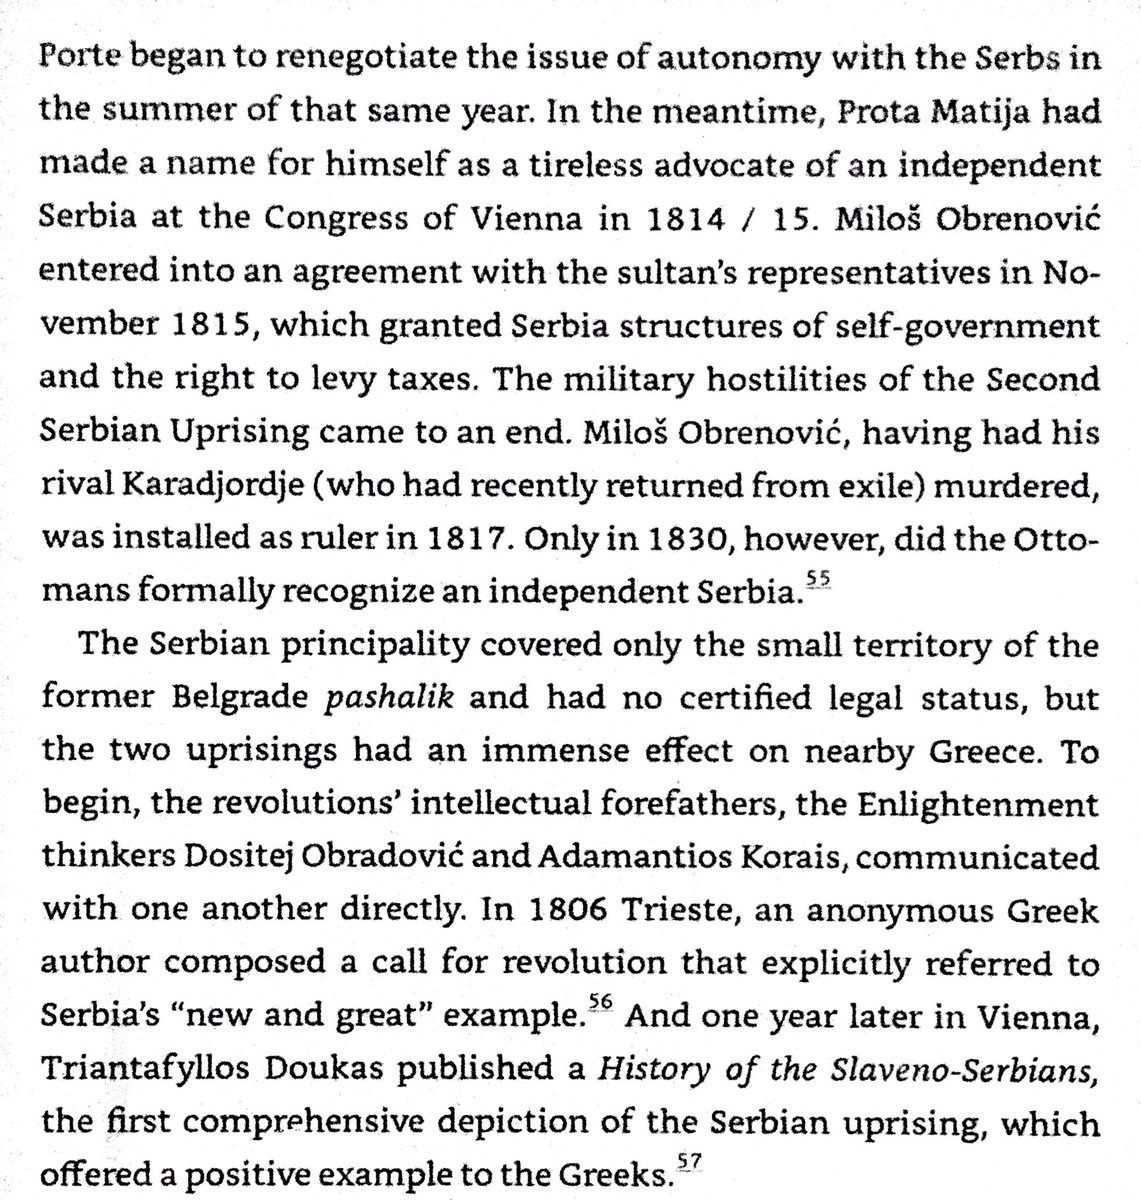 Serbs under Milos Obrenovic rebelled again in 1815 with Russian support. Serbs won independence, but only in the area around Belgrade. Obrenovic murdered his rival Karadjordje.